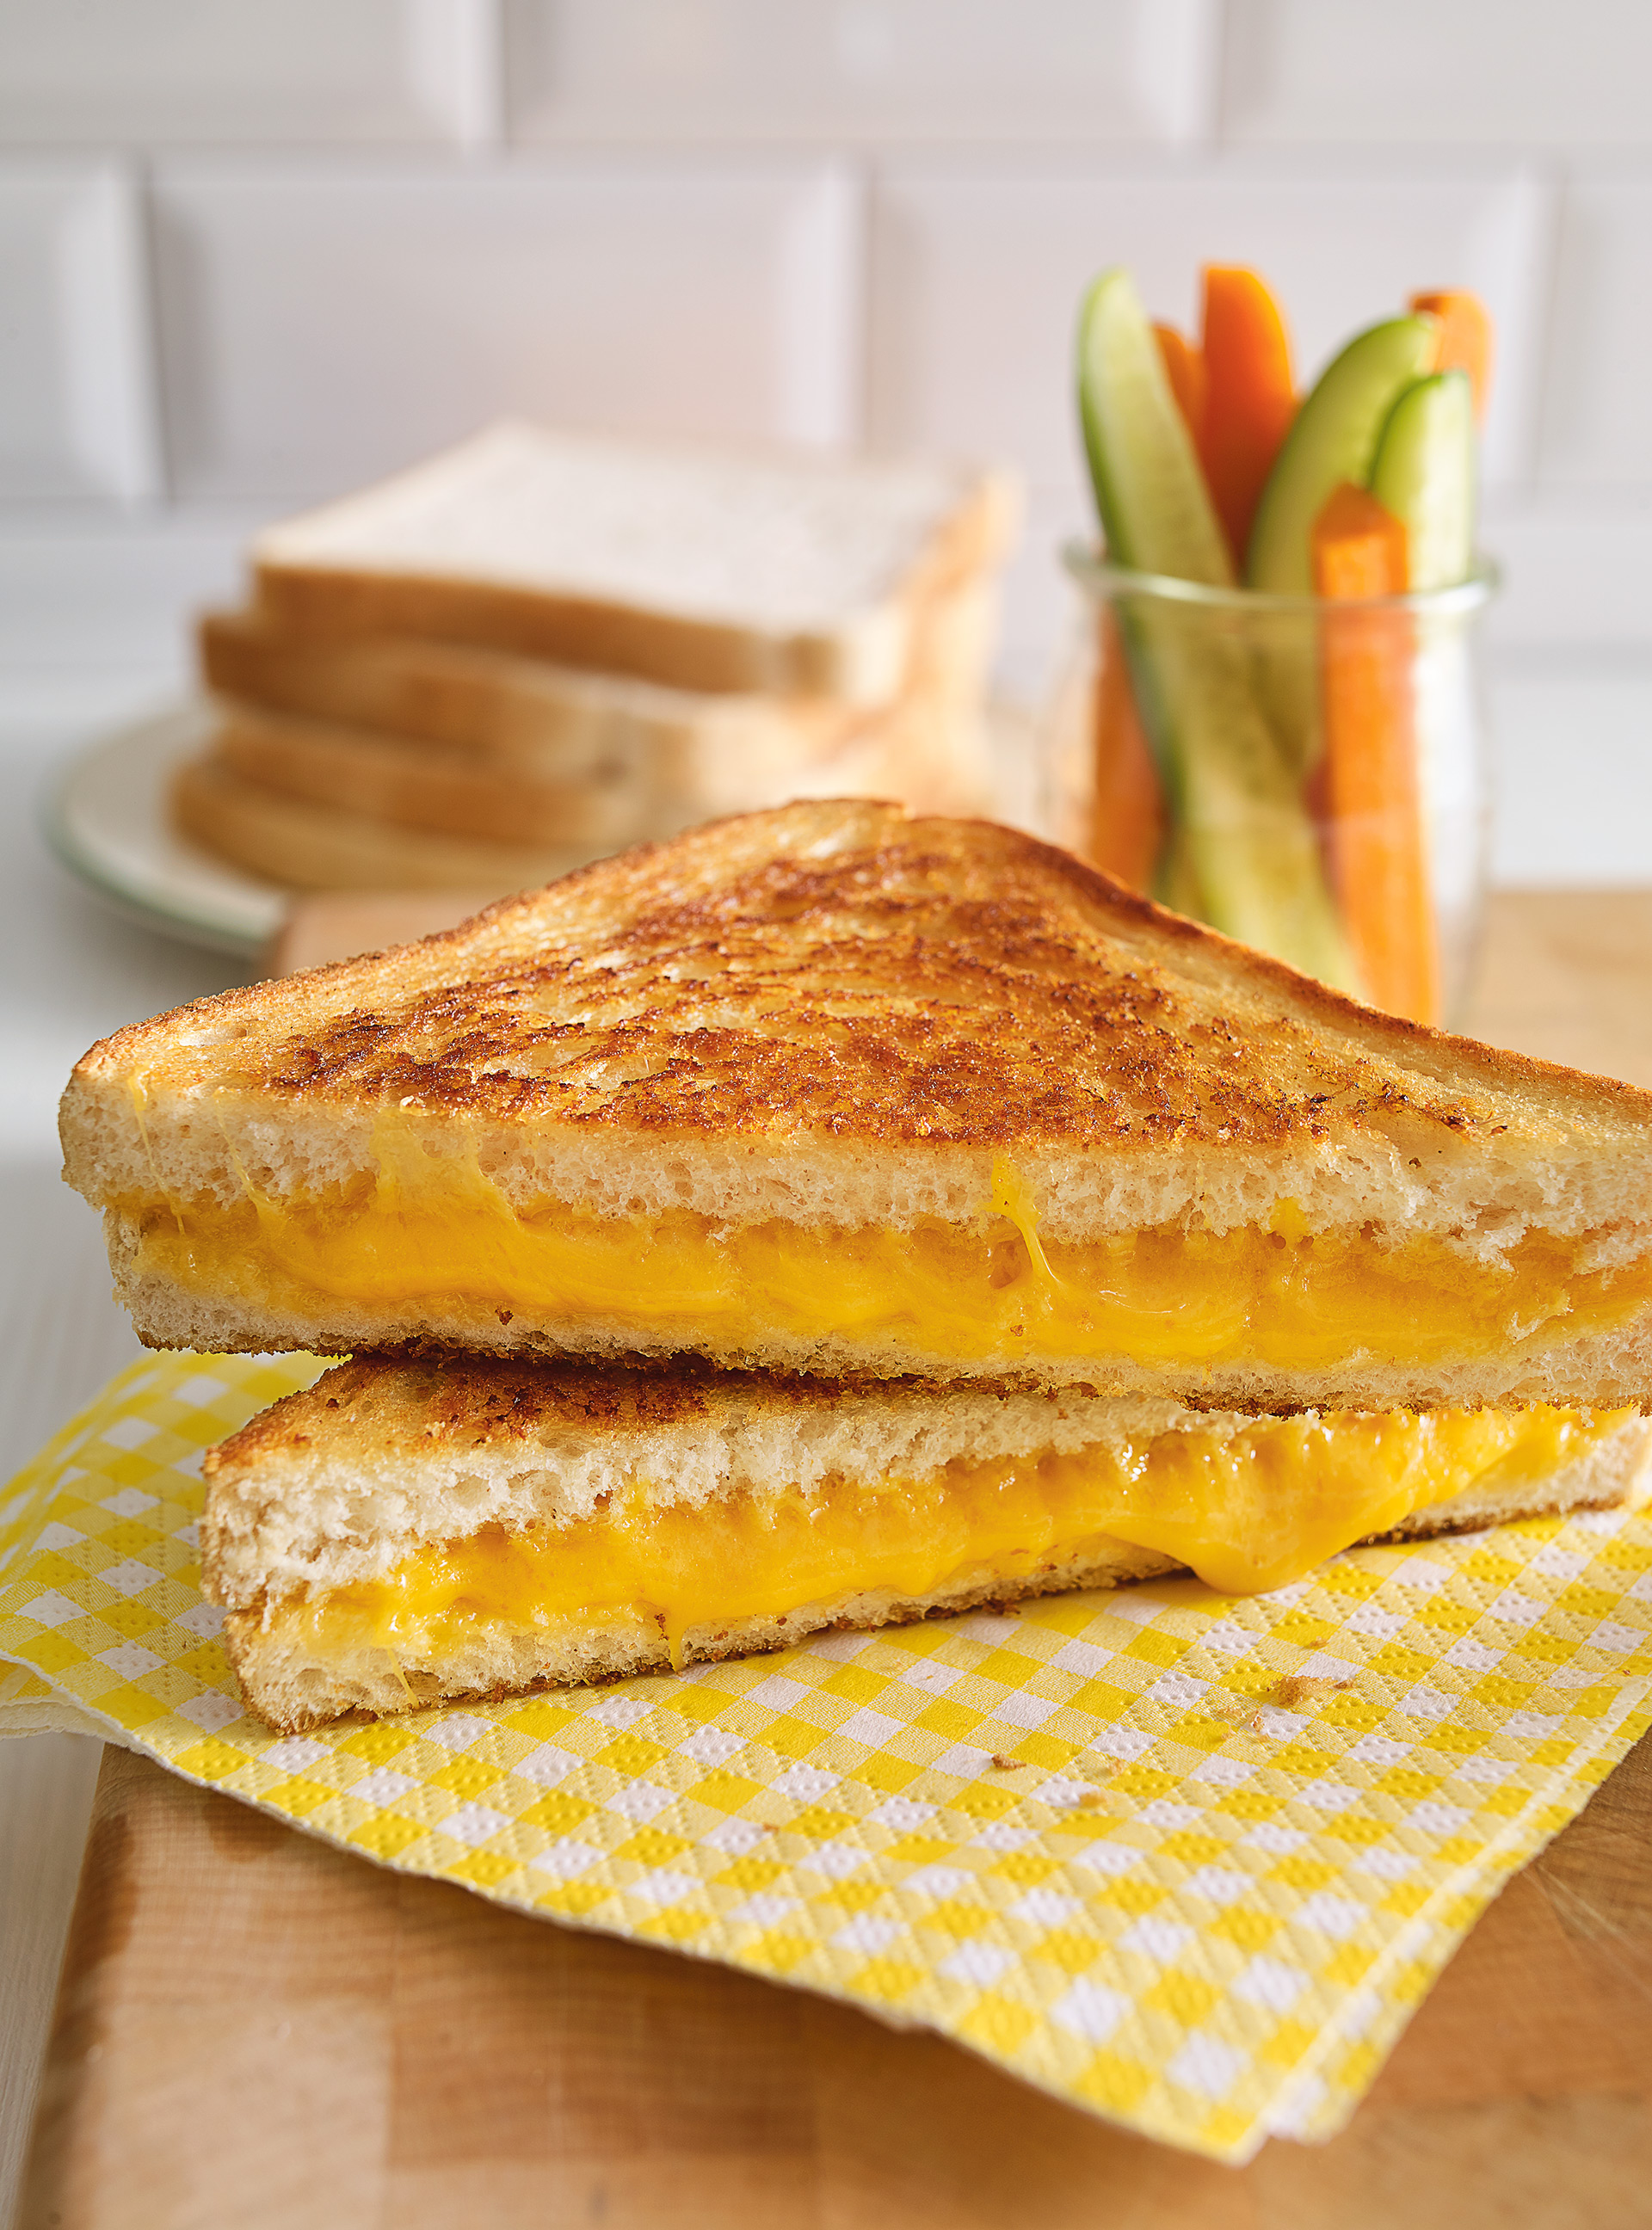 Classic Grilled Cheese Sandwich